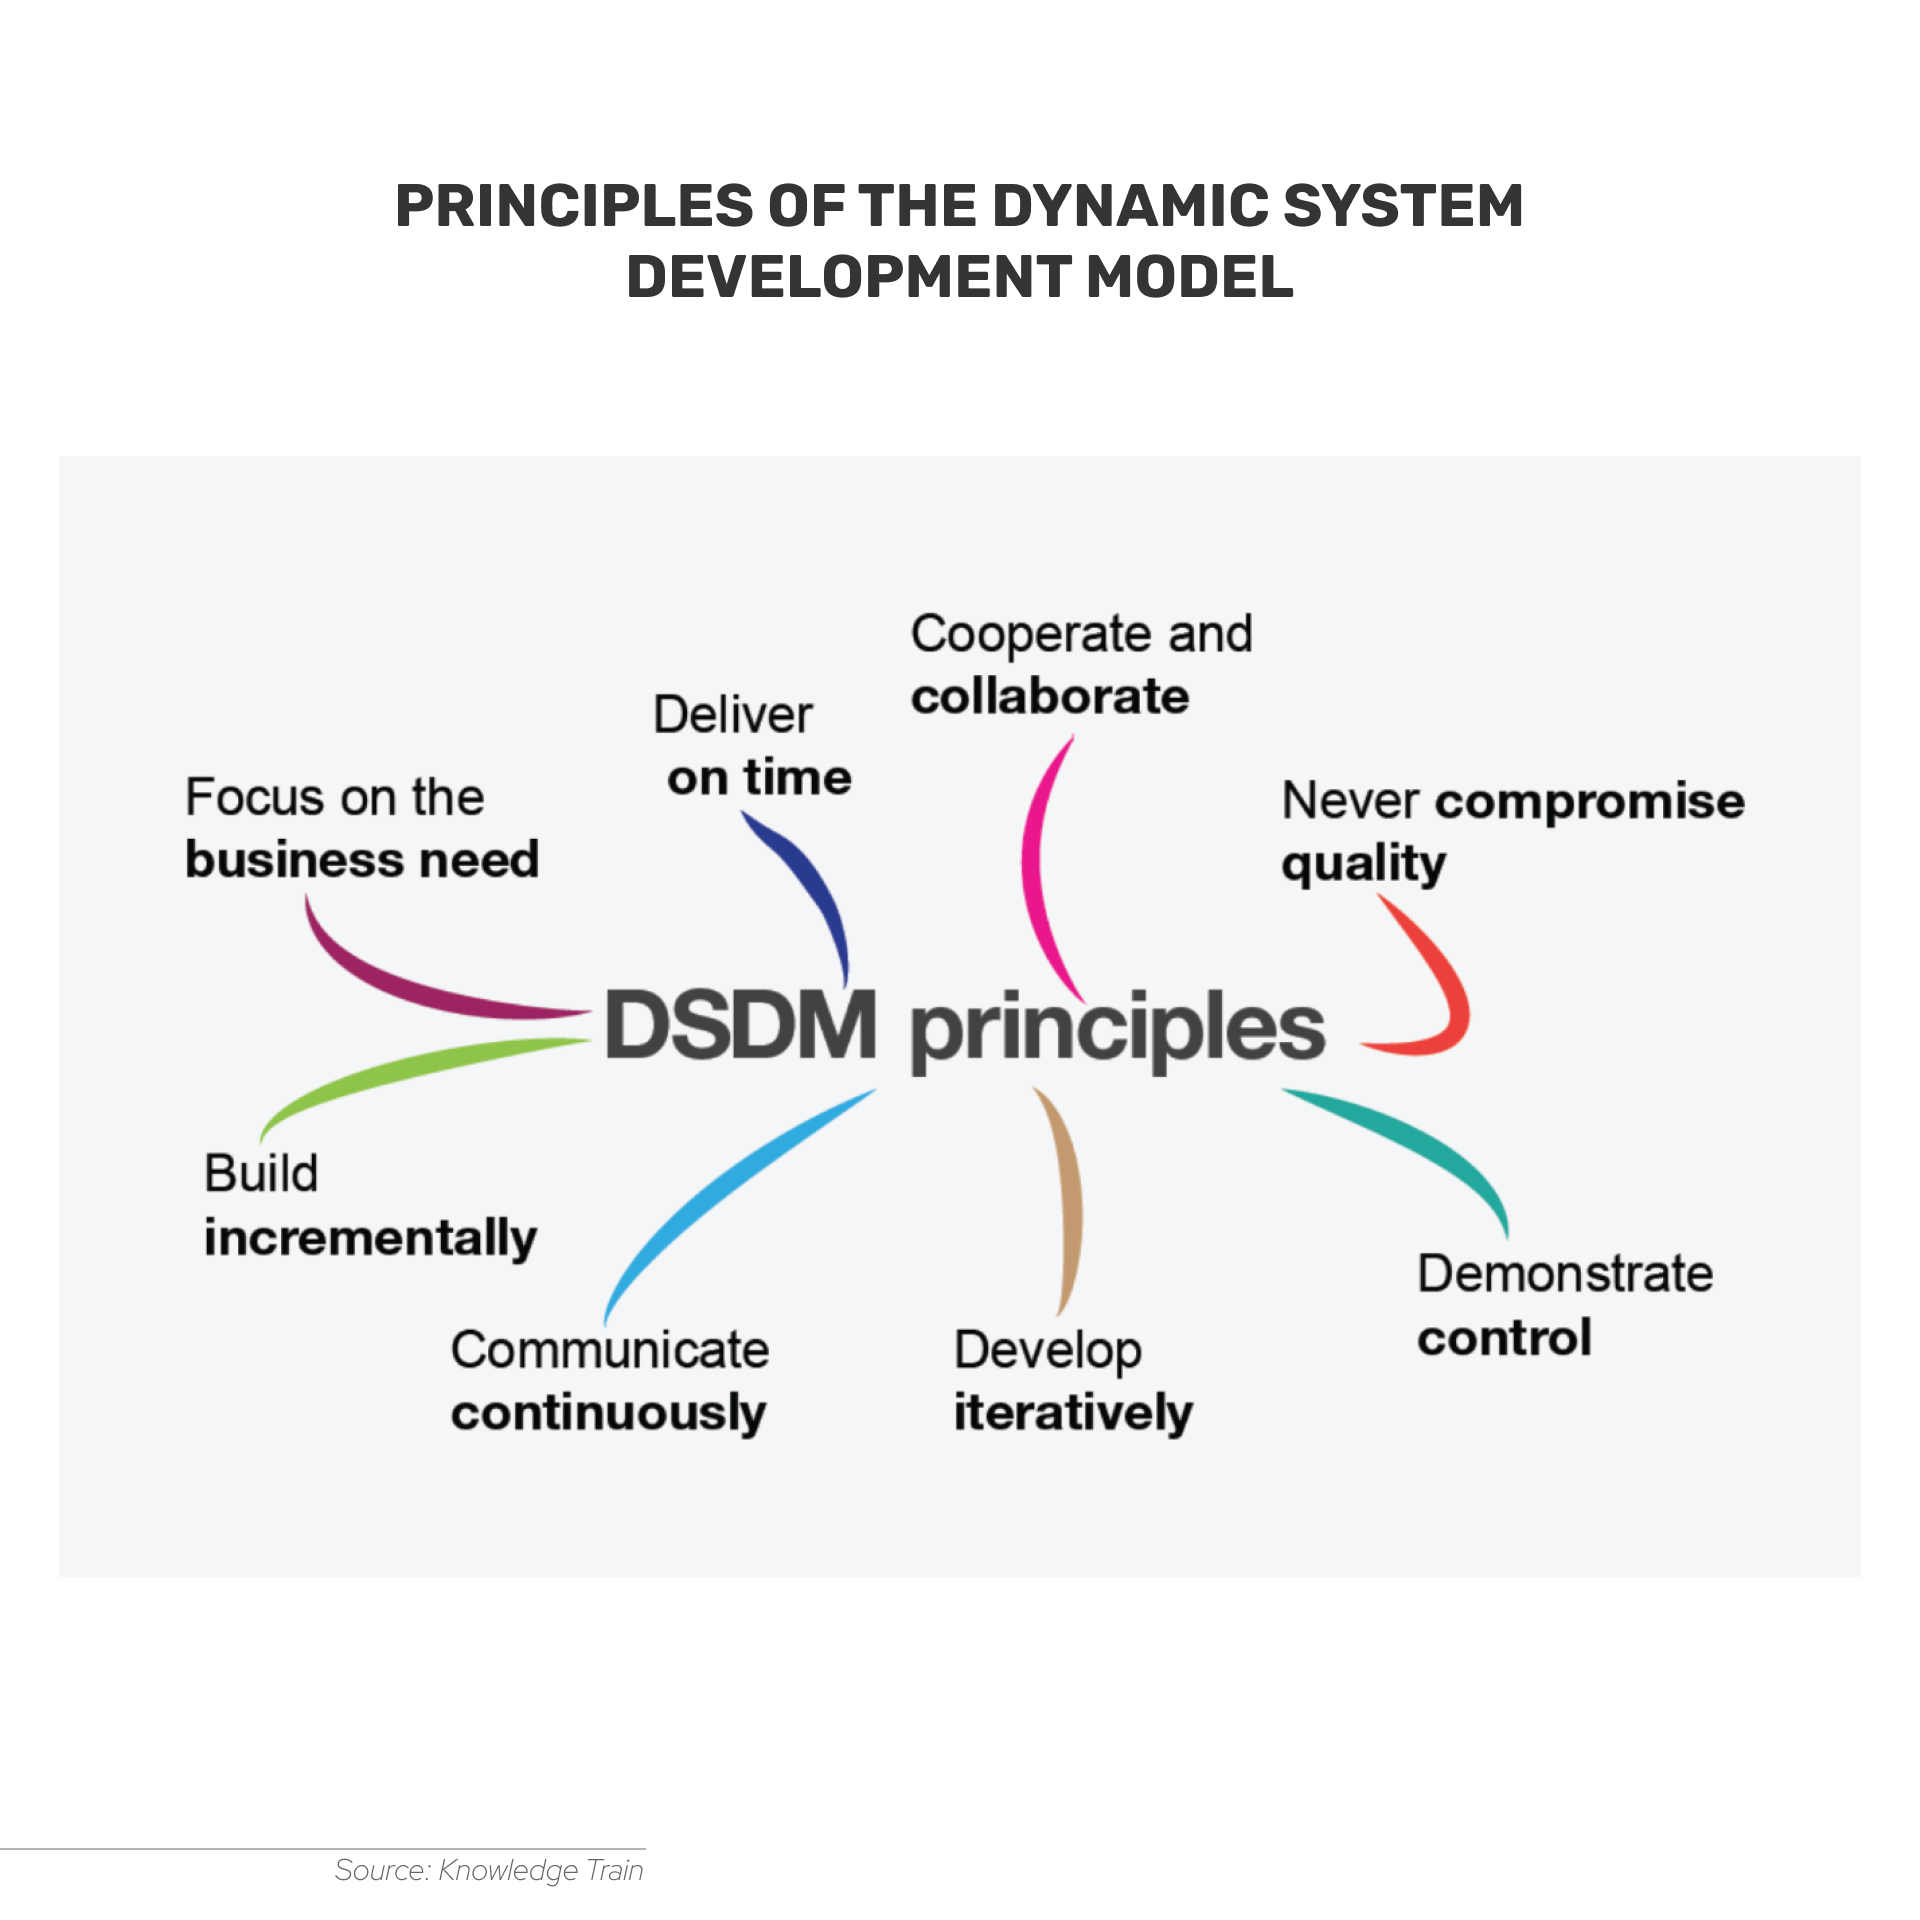 Dynamic System Development Model prioritizes timely delivery, focus on business needs, and close cooperation and collaboration.